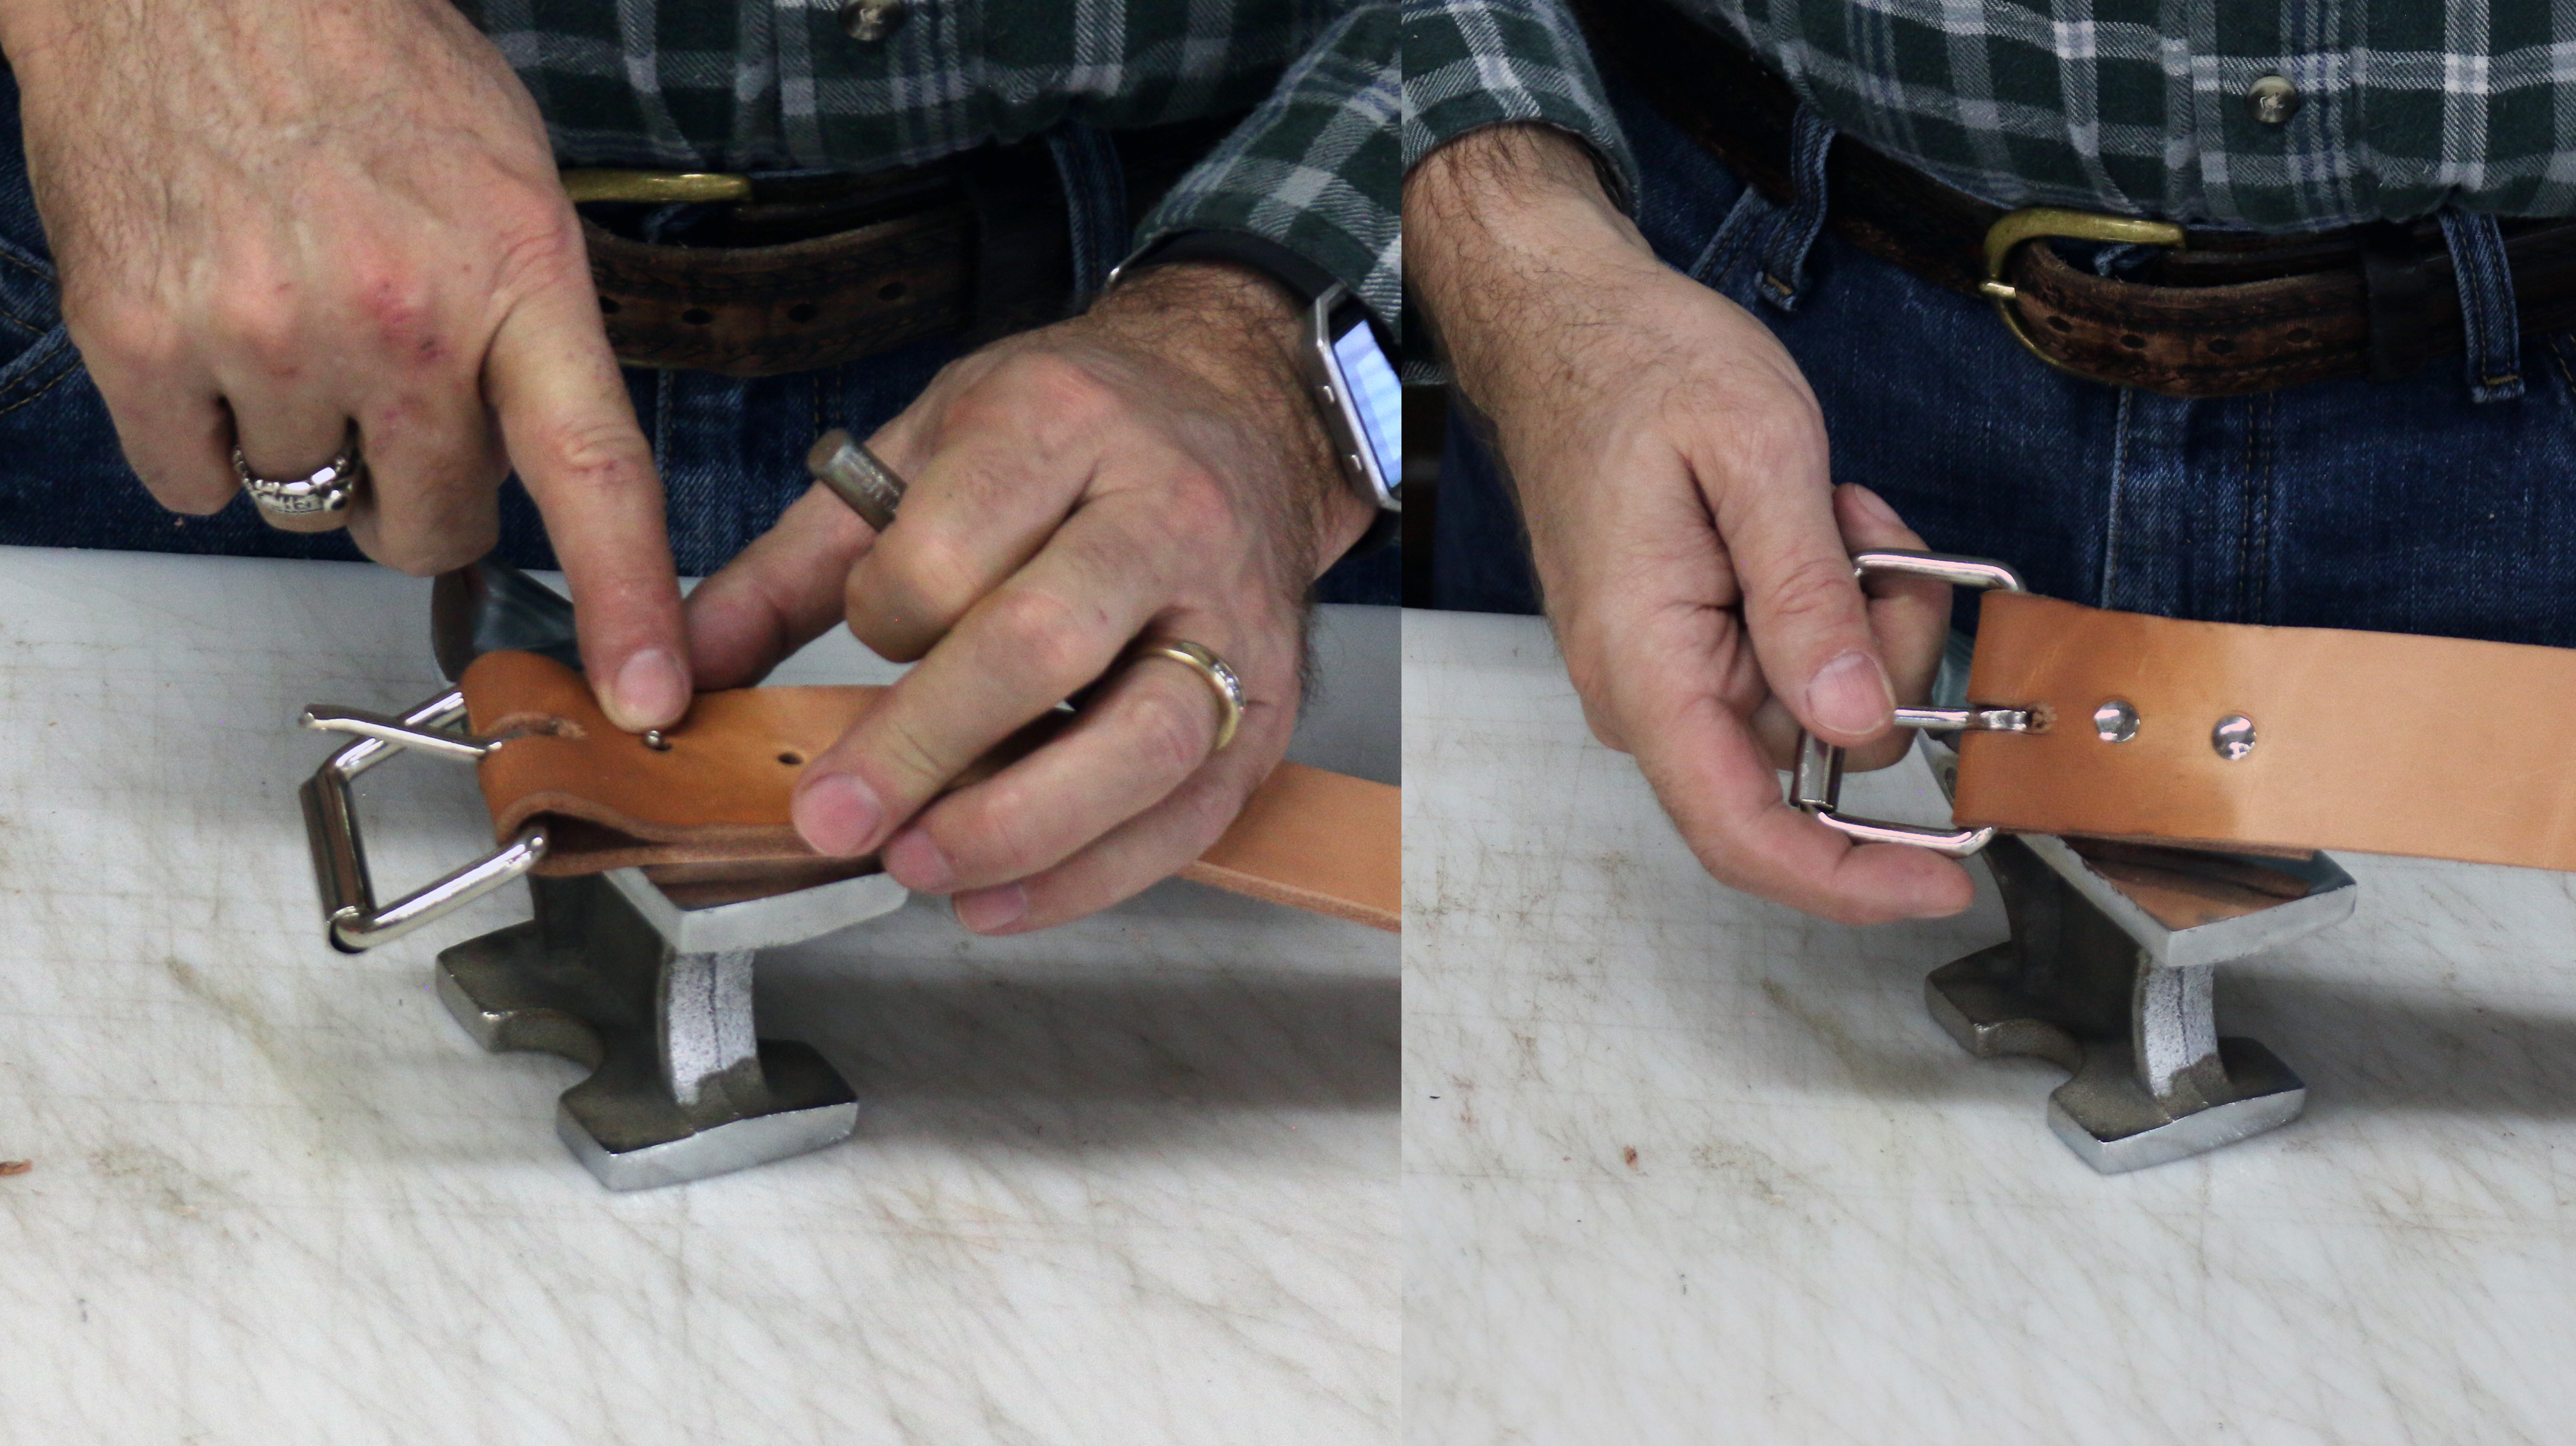 Securing the buckle in place by hand.